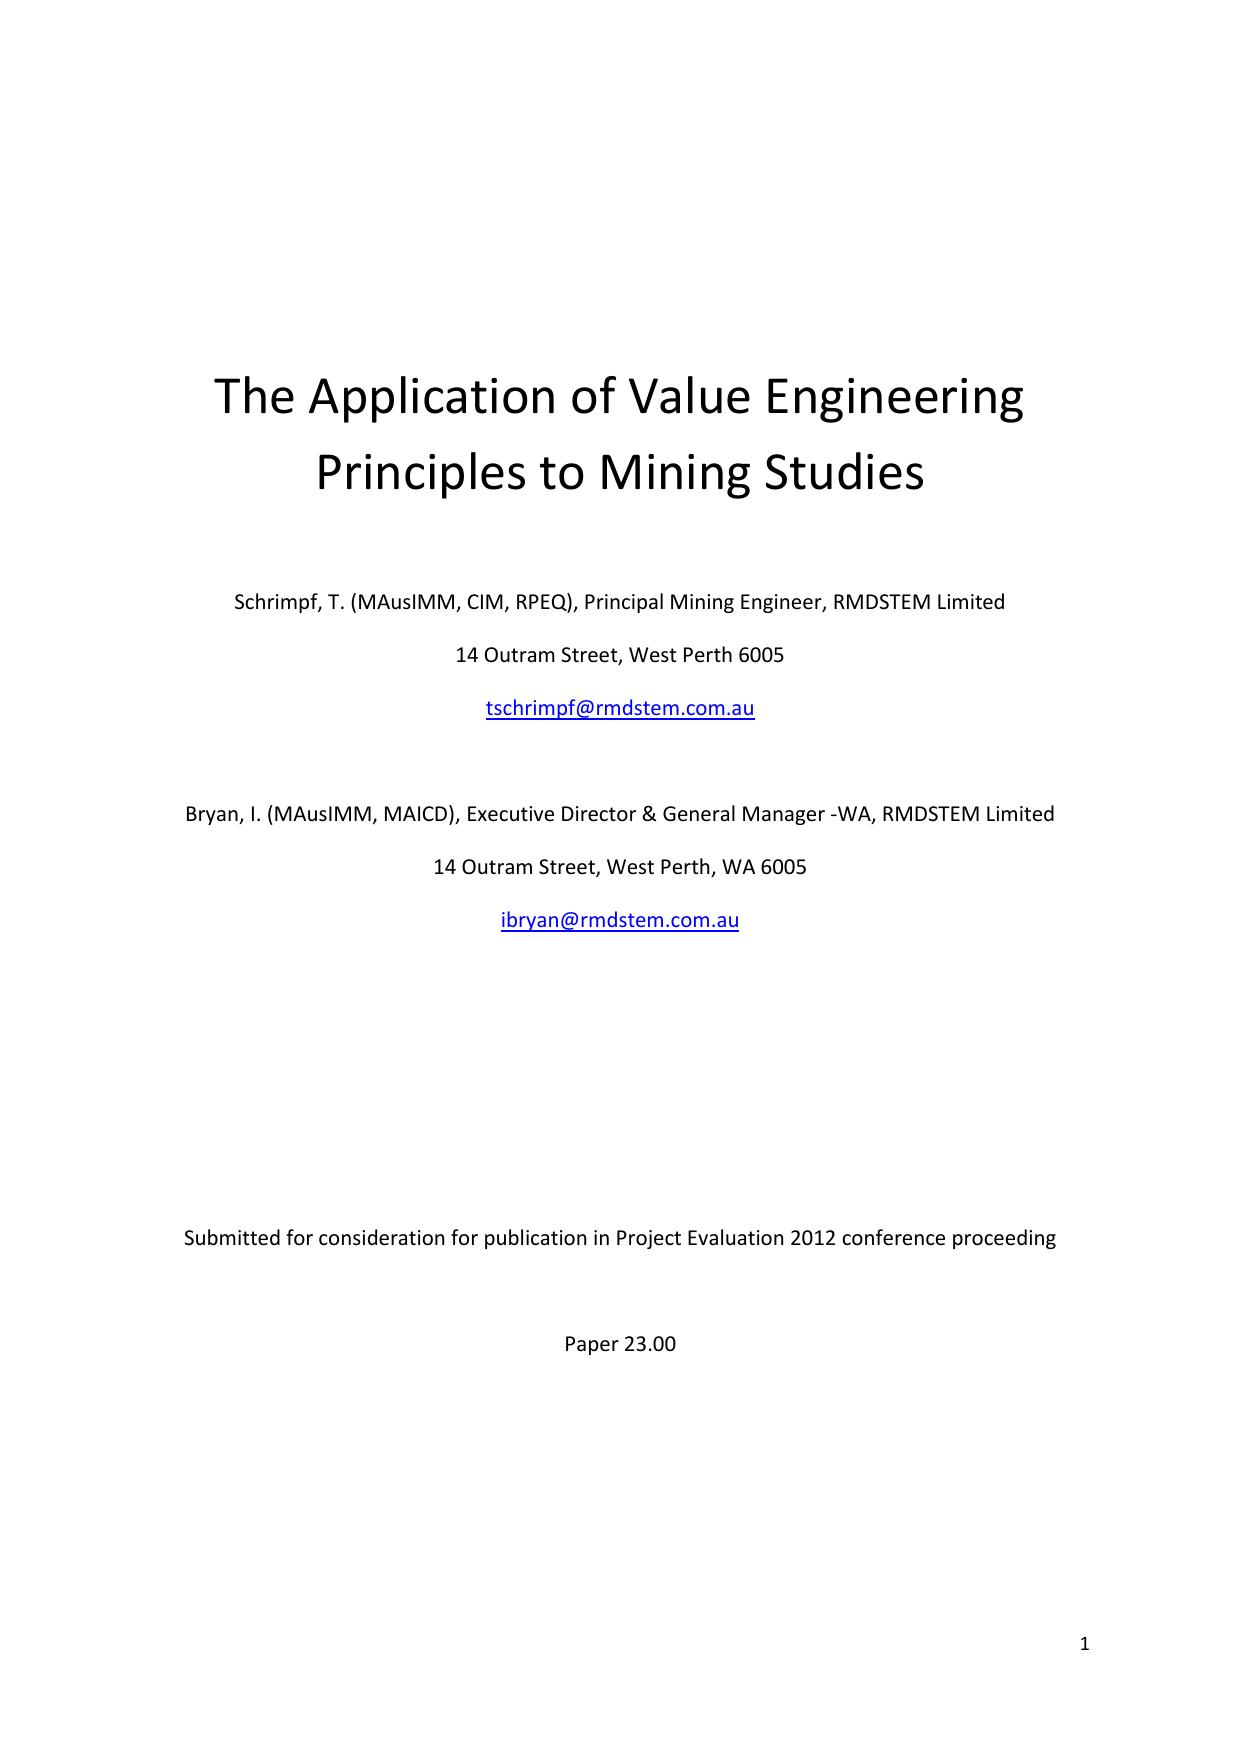 The Application of ValueEng Principles to Mining Studes 2012